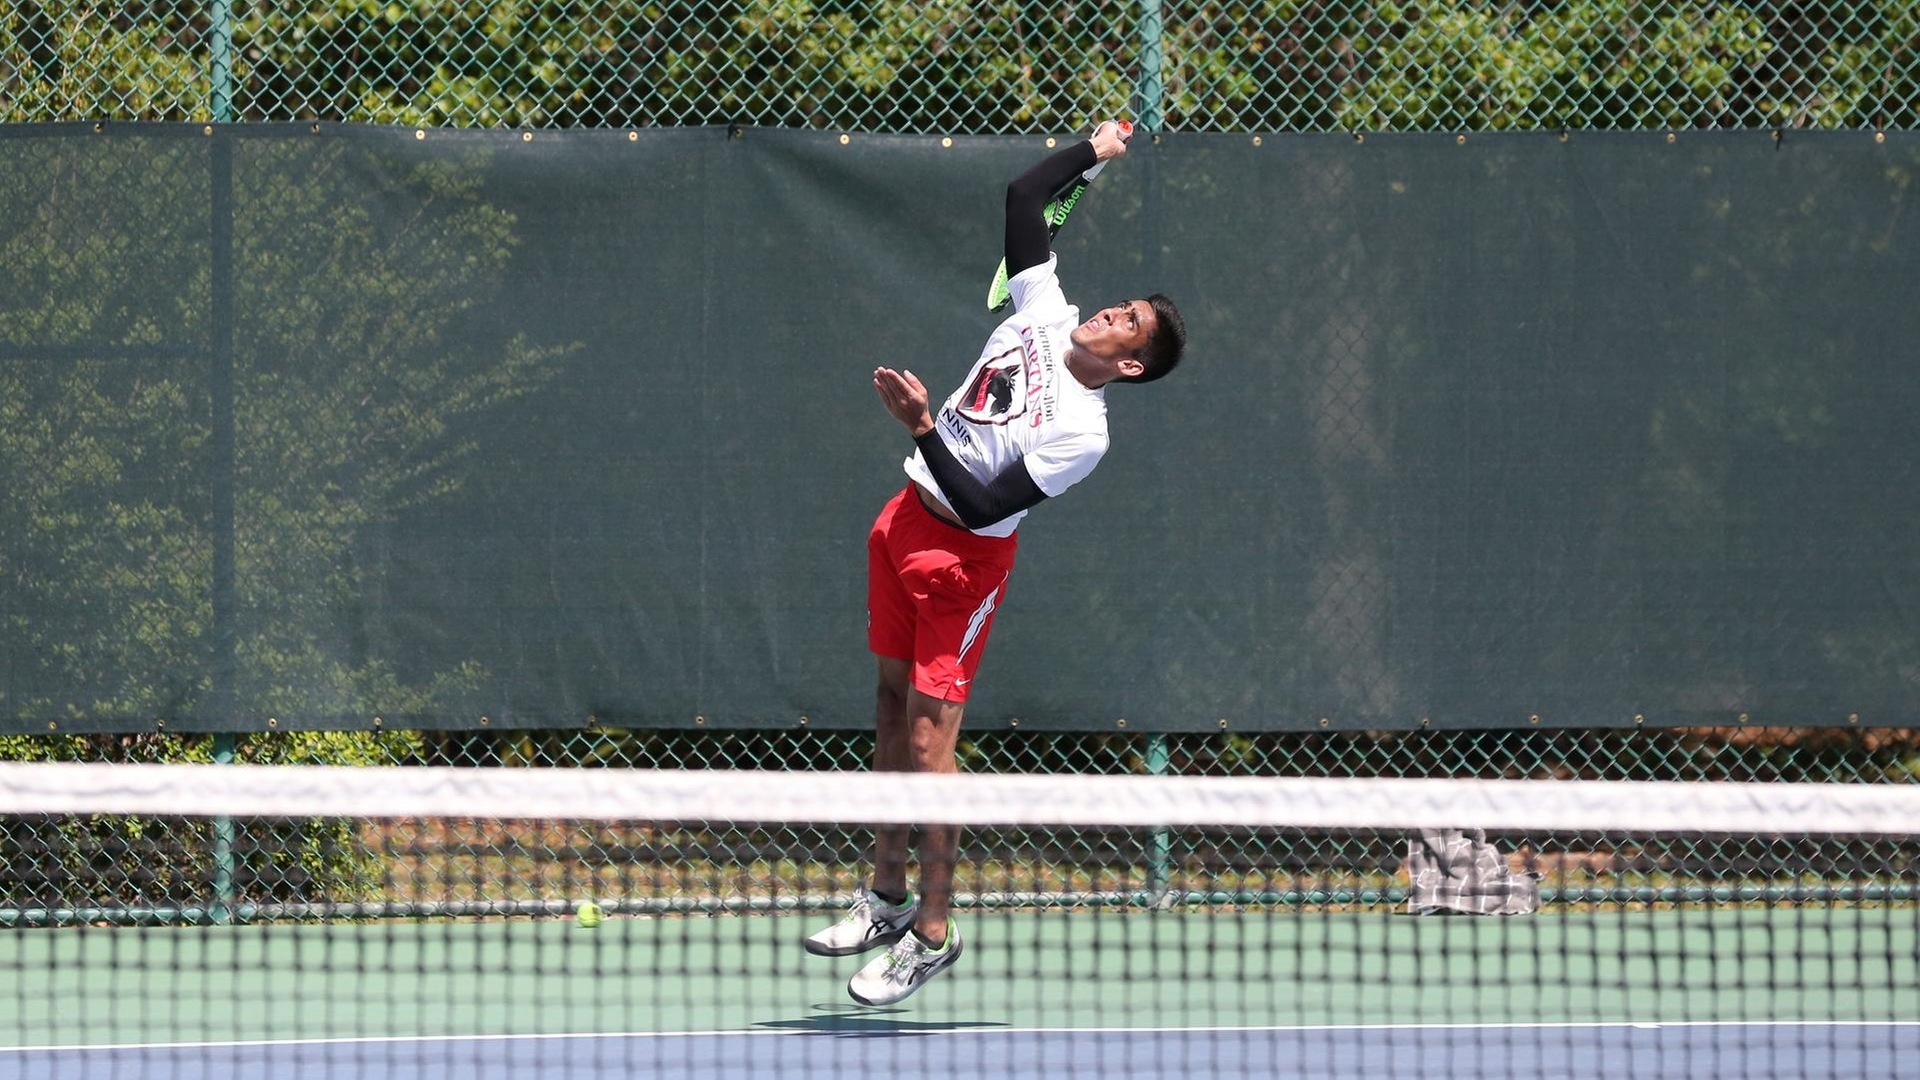 men's tennis player wearing a white shirt and red shorts in serving motion